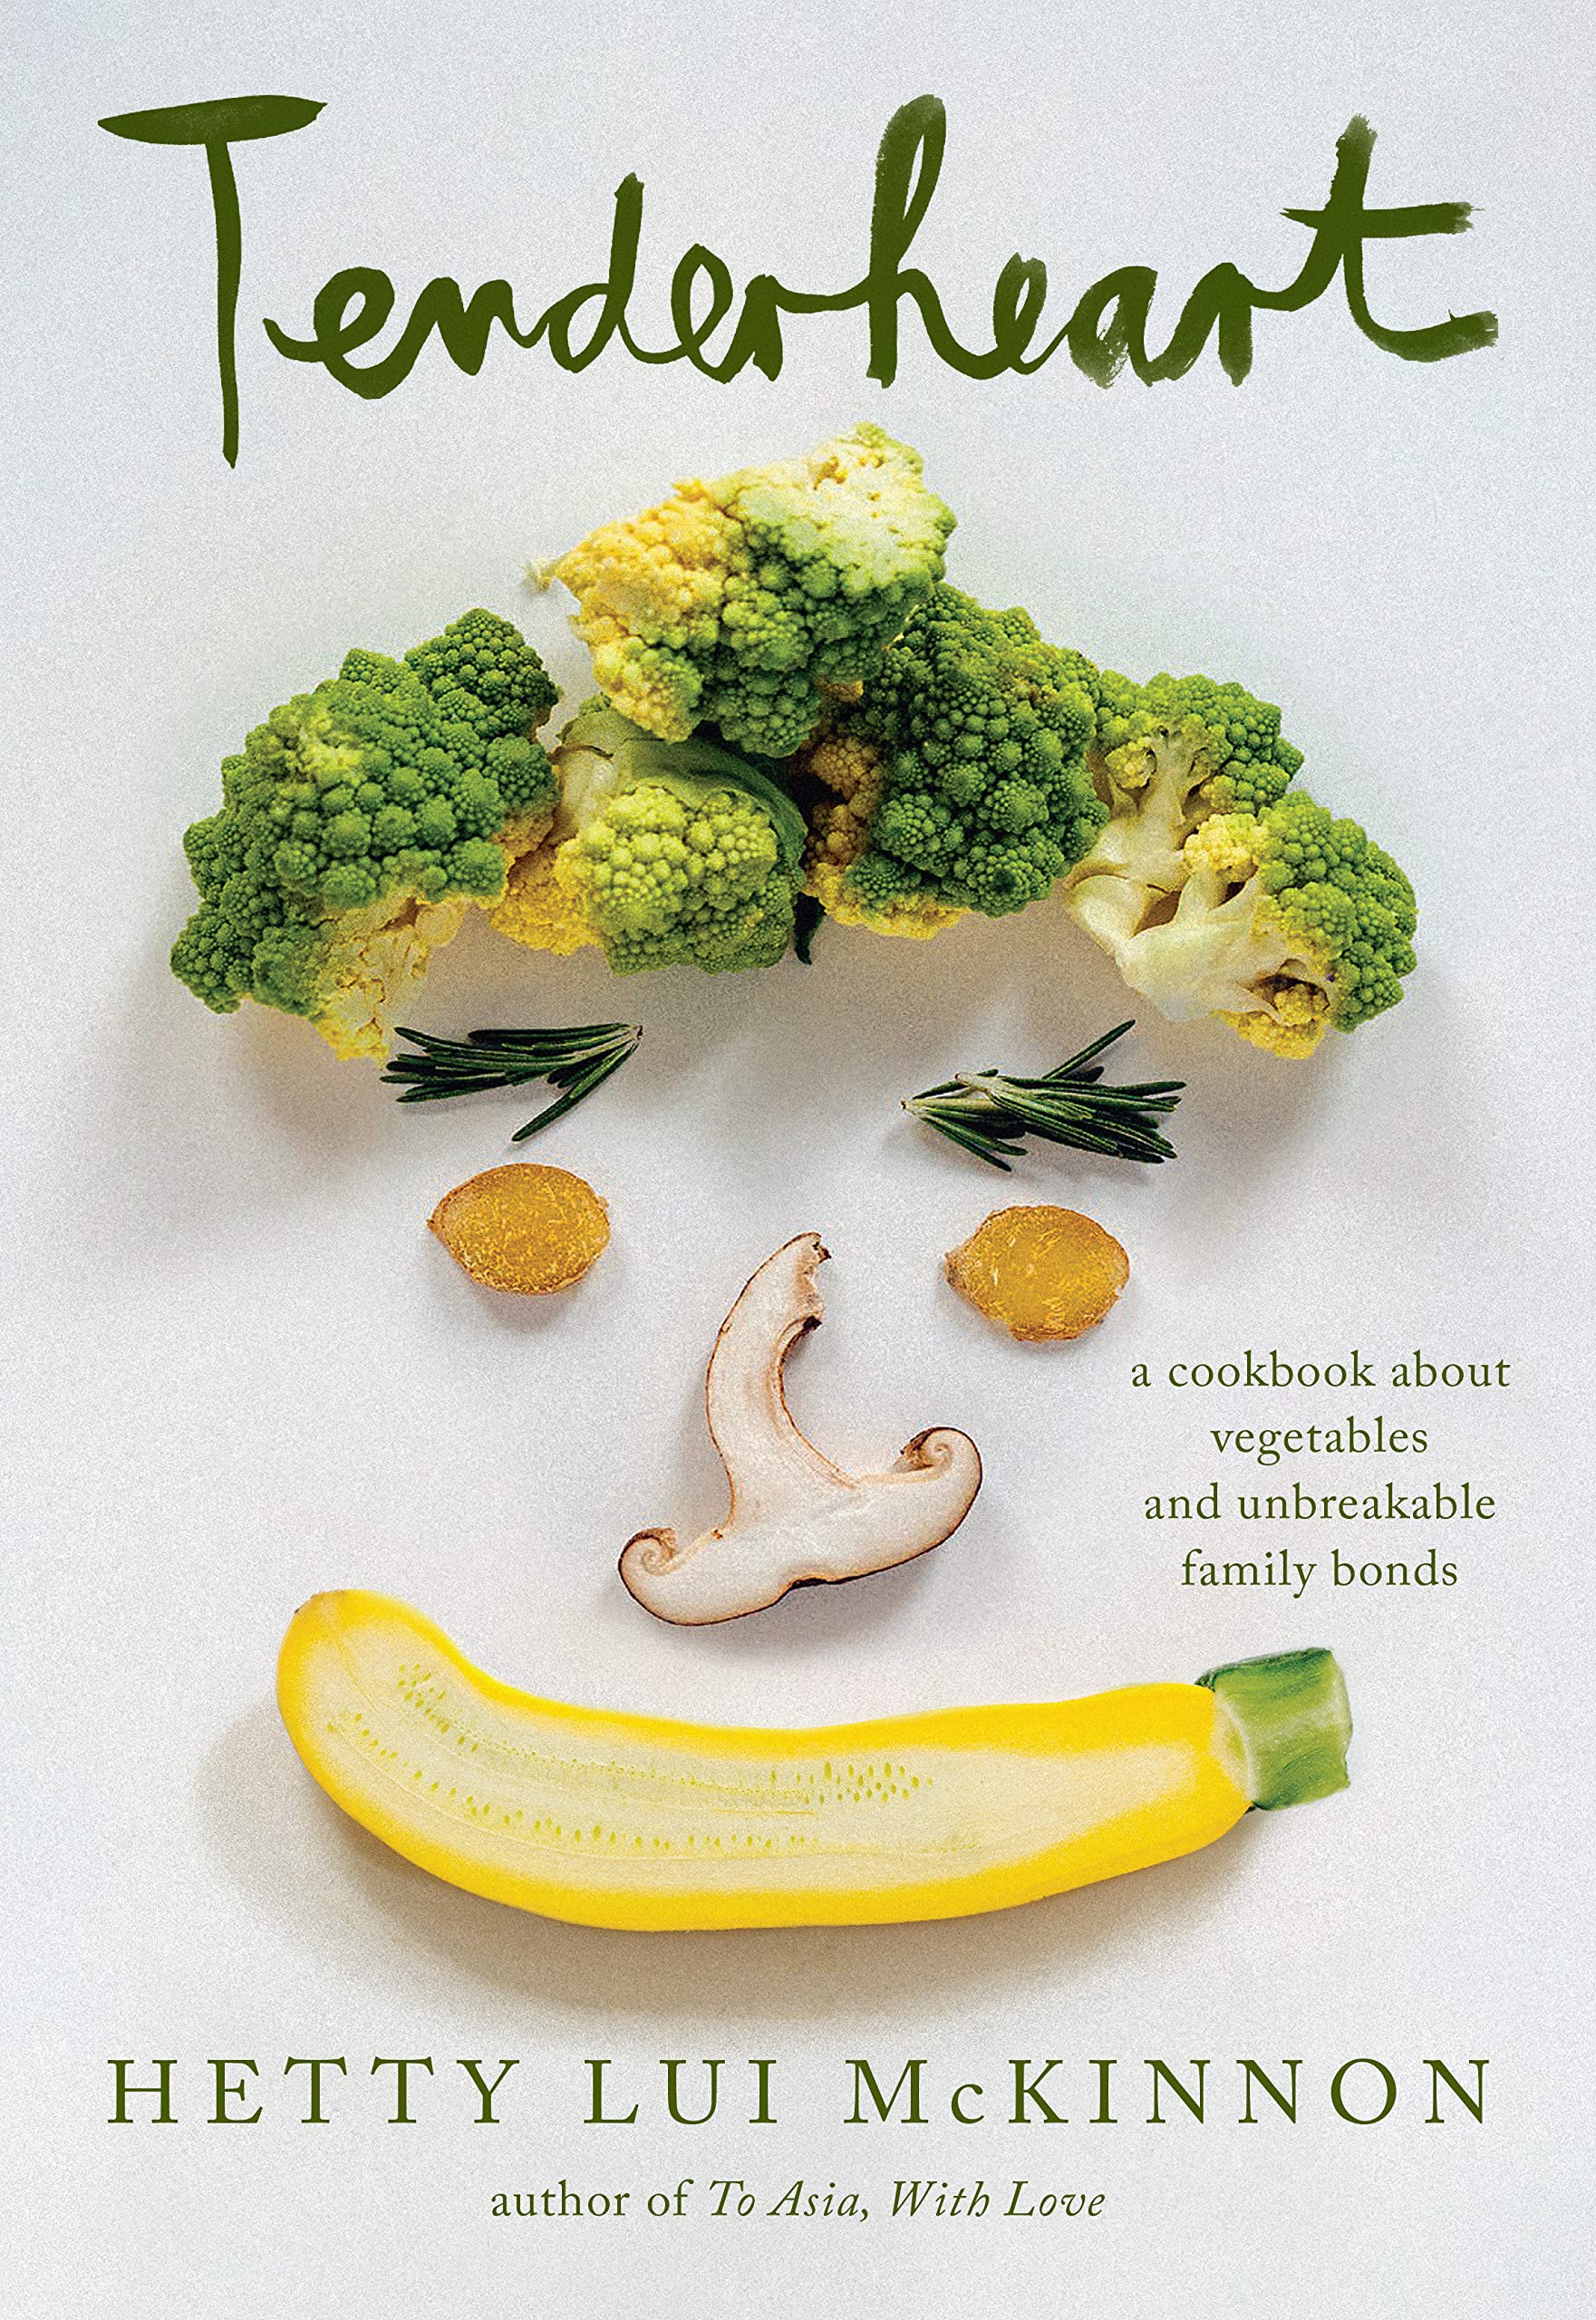 Tenderheart: A Cookbook About Vegetables and Unbreakable Family Bonds (Hetty Lui McKinnon) *Signed*